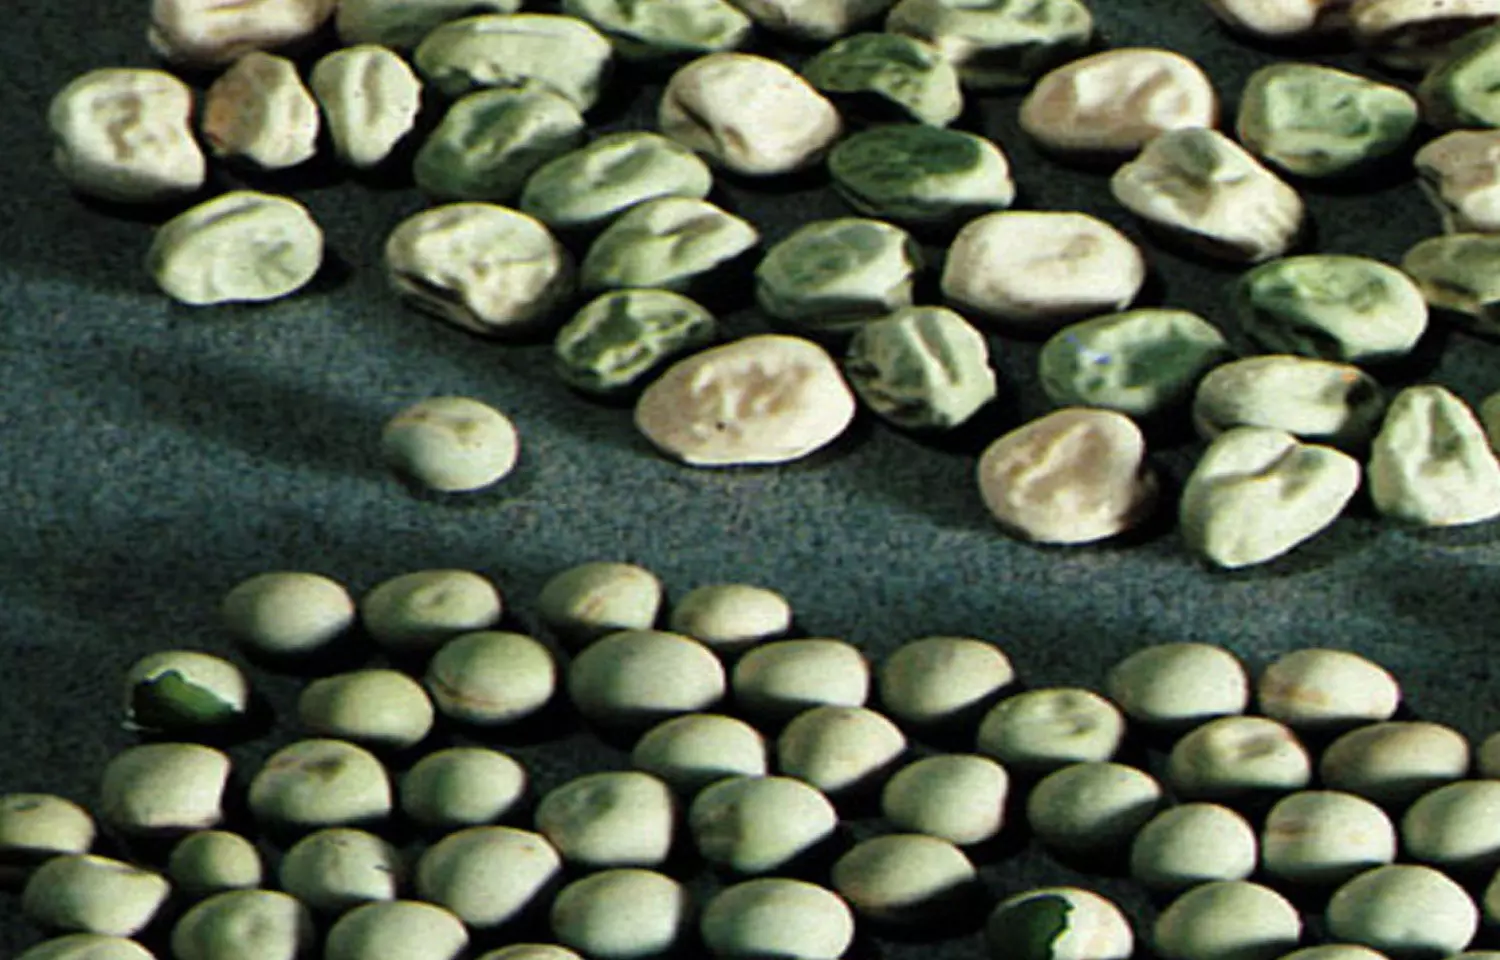 Wrinkled peas may help reduce blood sugar and diabetes risk, finds Study